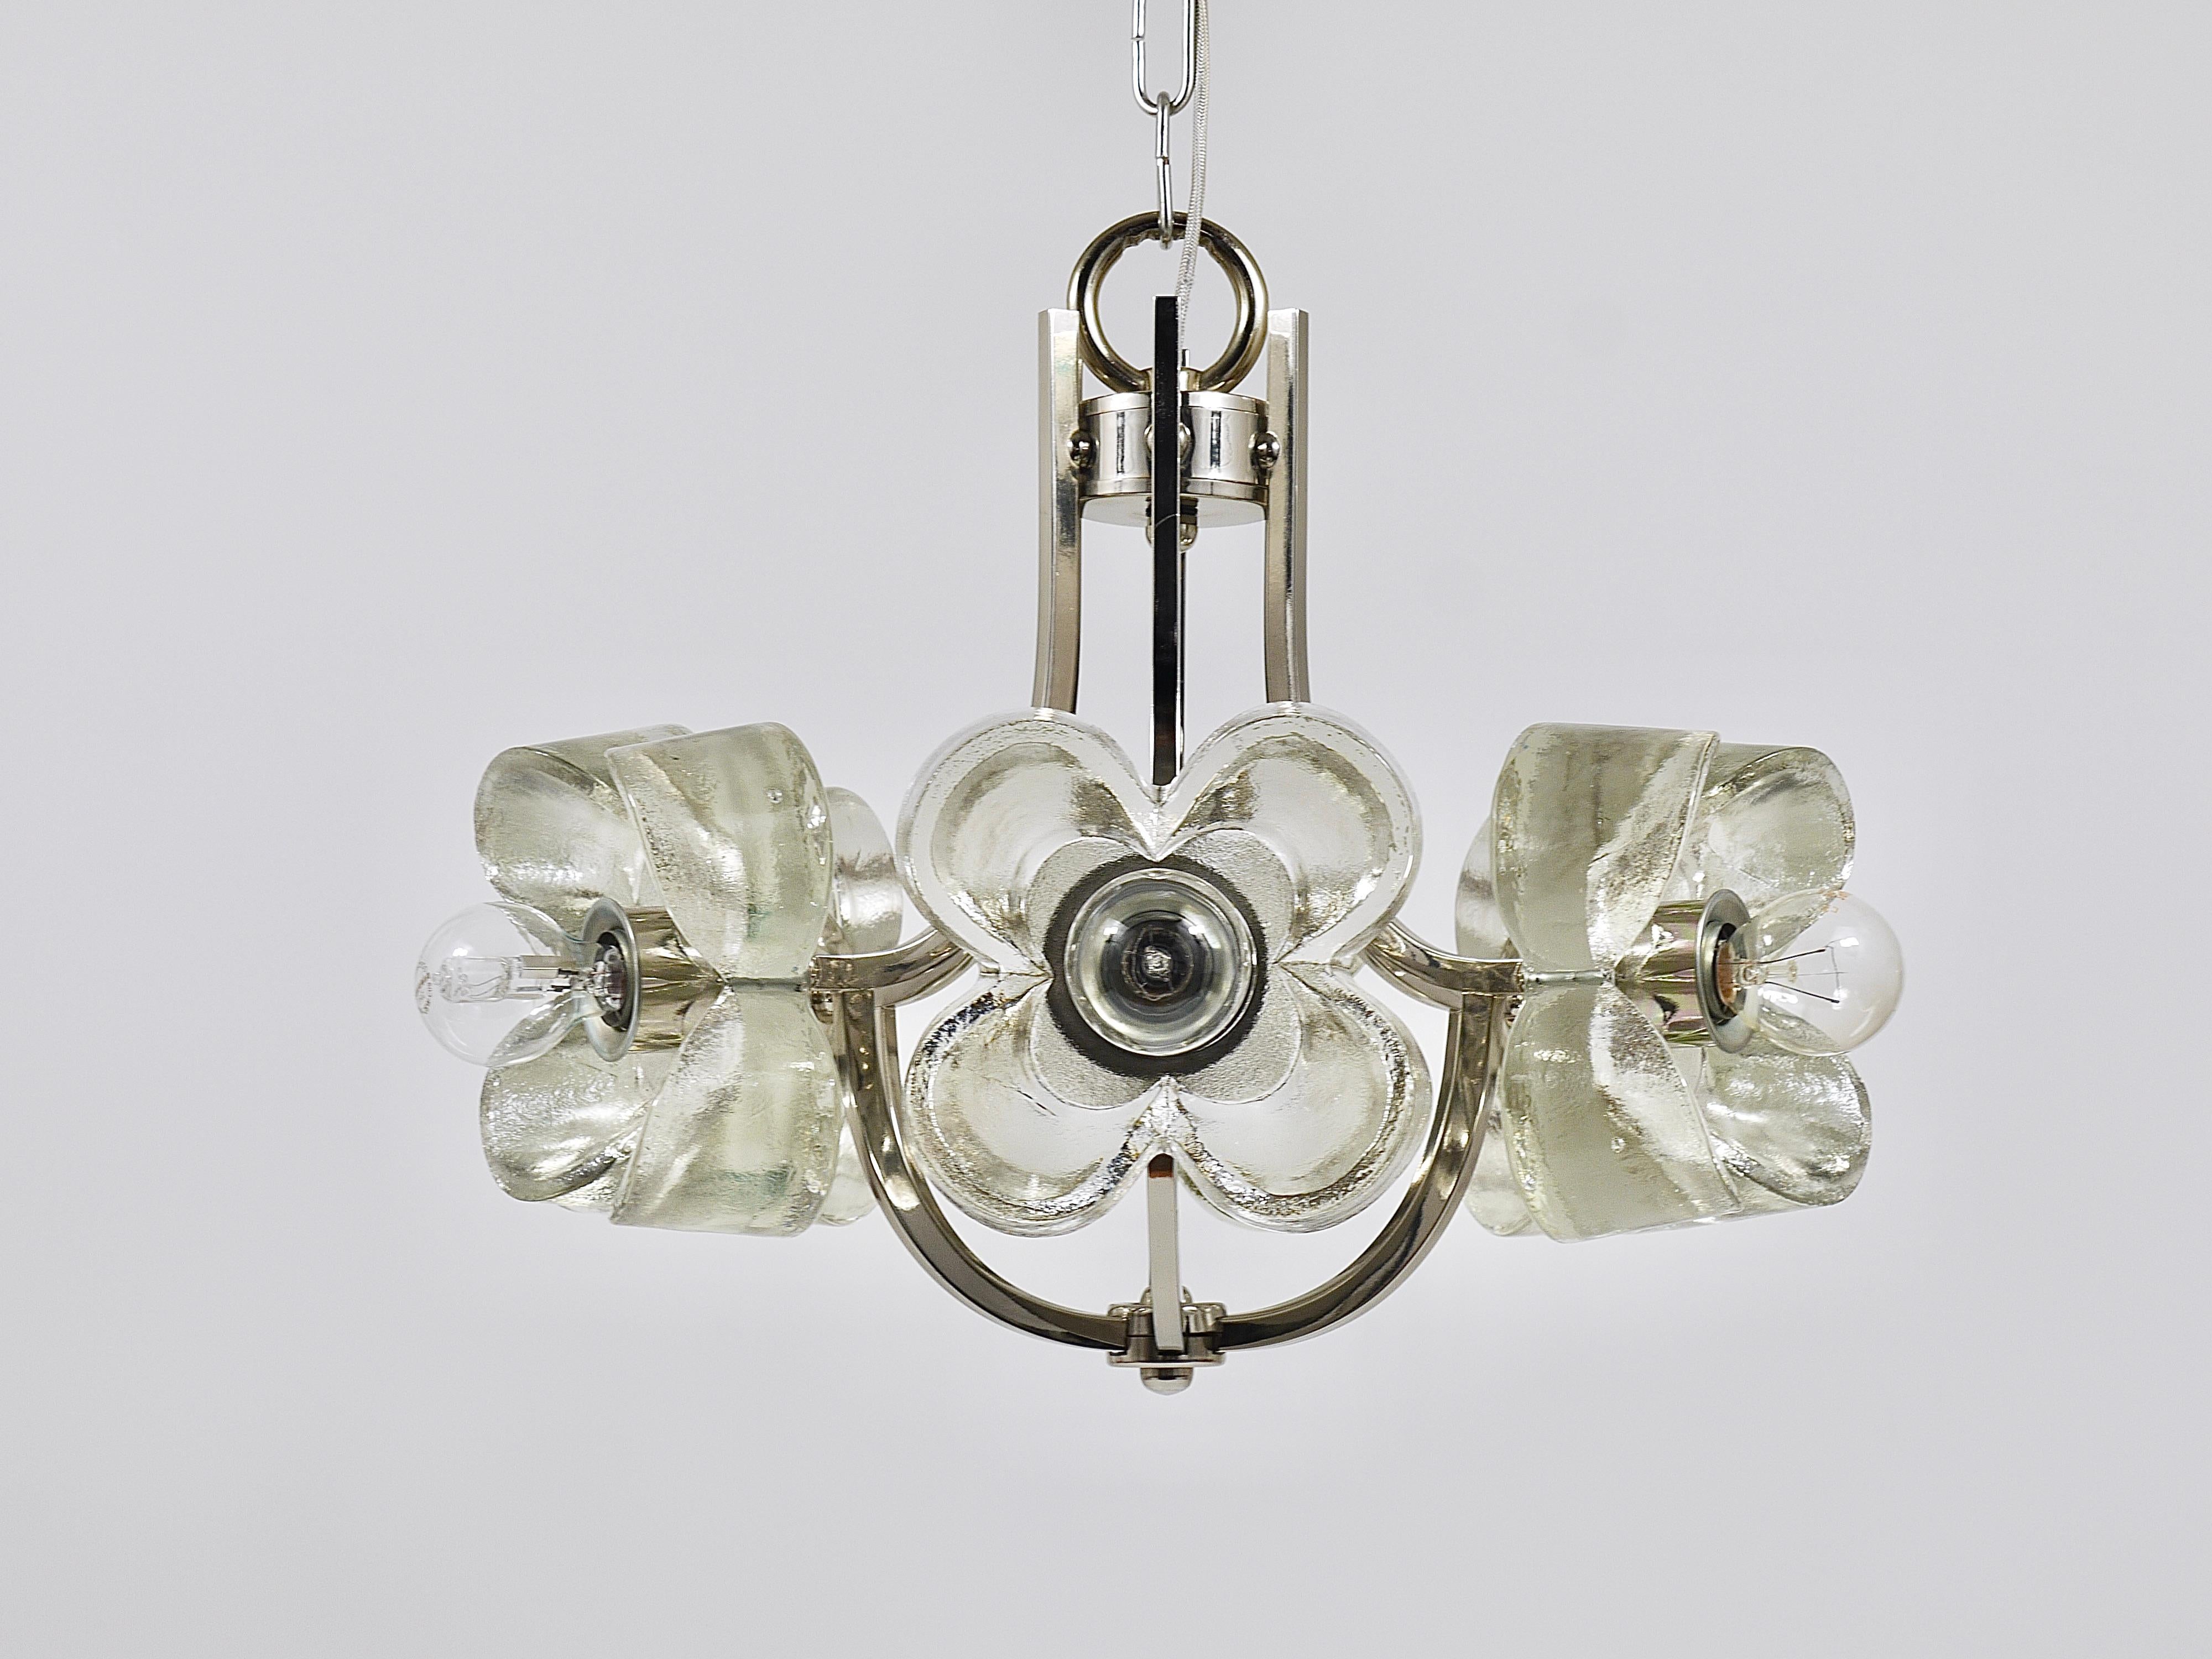 A charming and decorative mid-century brass & glass chandelier / pendant light fixture from the 1970s. Designed and manufactured by Sische / Simon and Schelle in Germany. Consists of a nickel / chrome plated frame with six solid and thick crystal